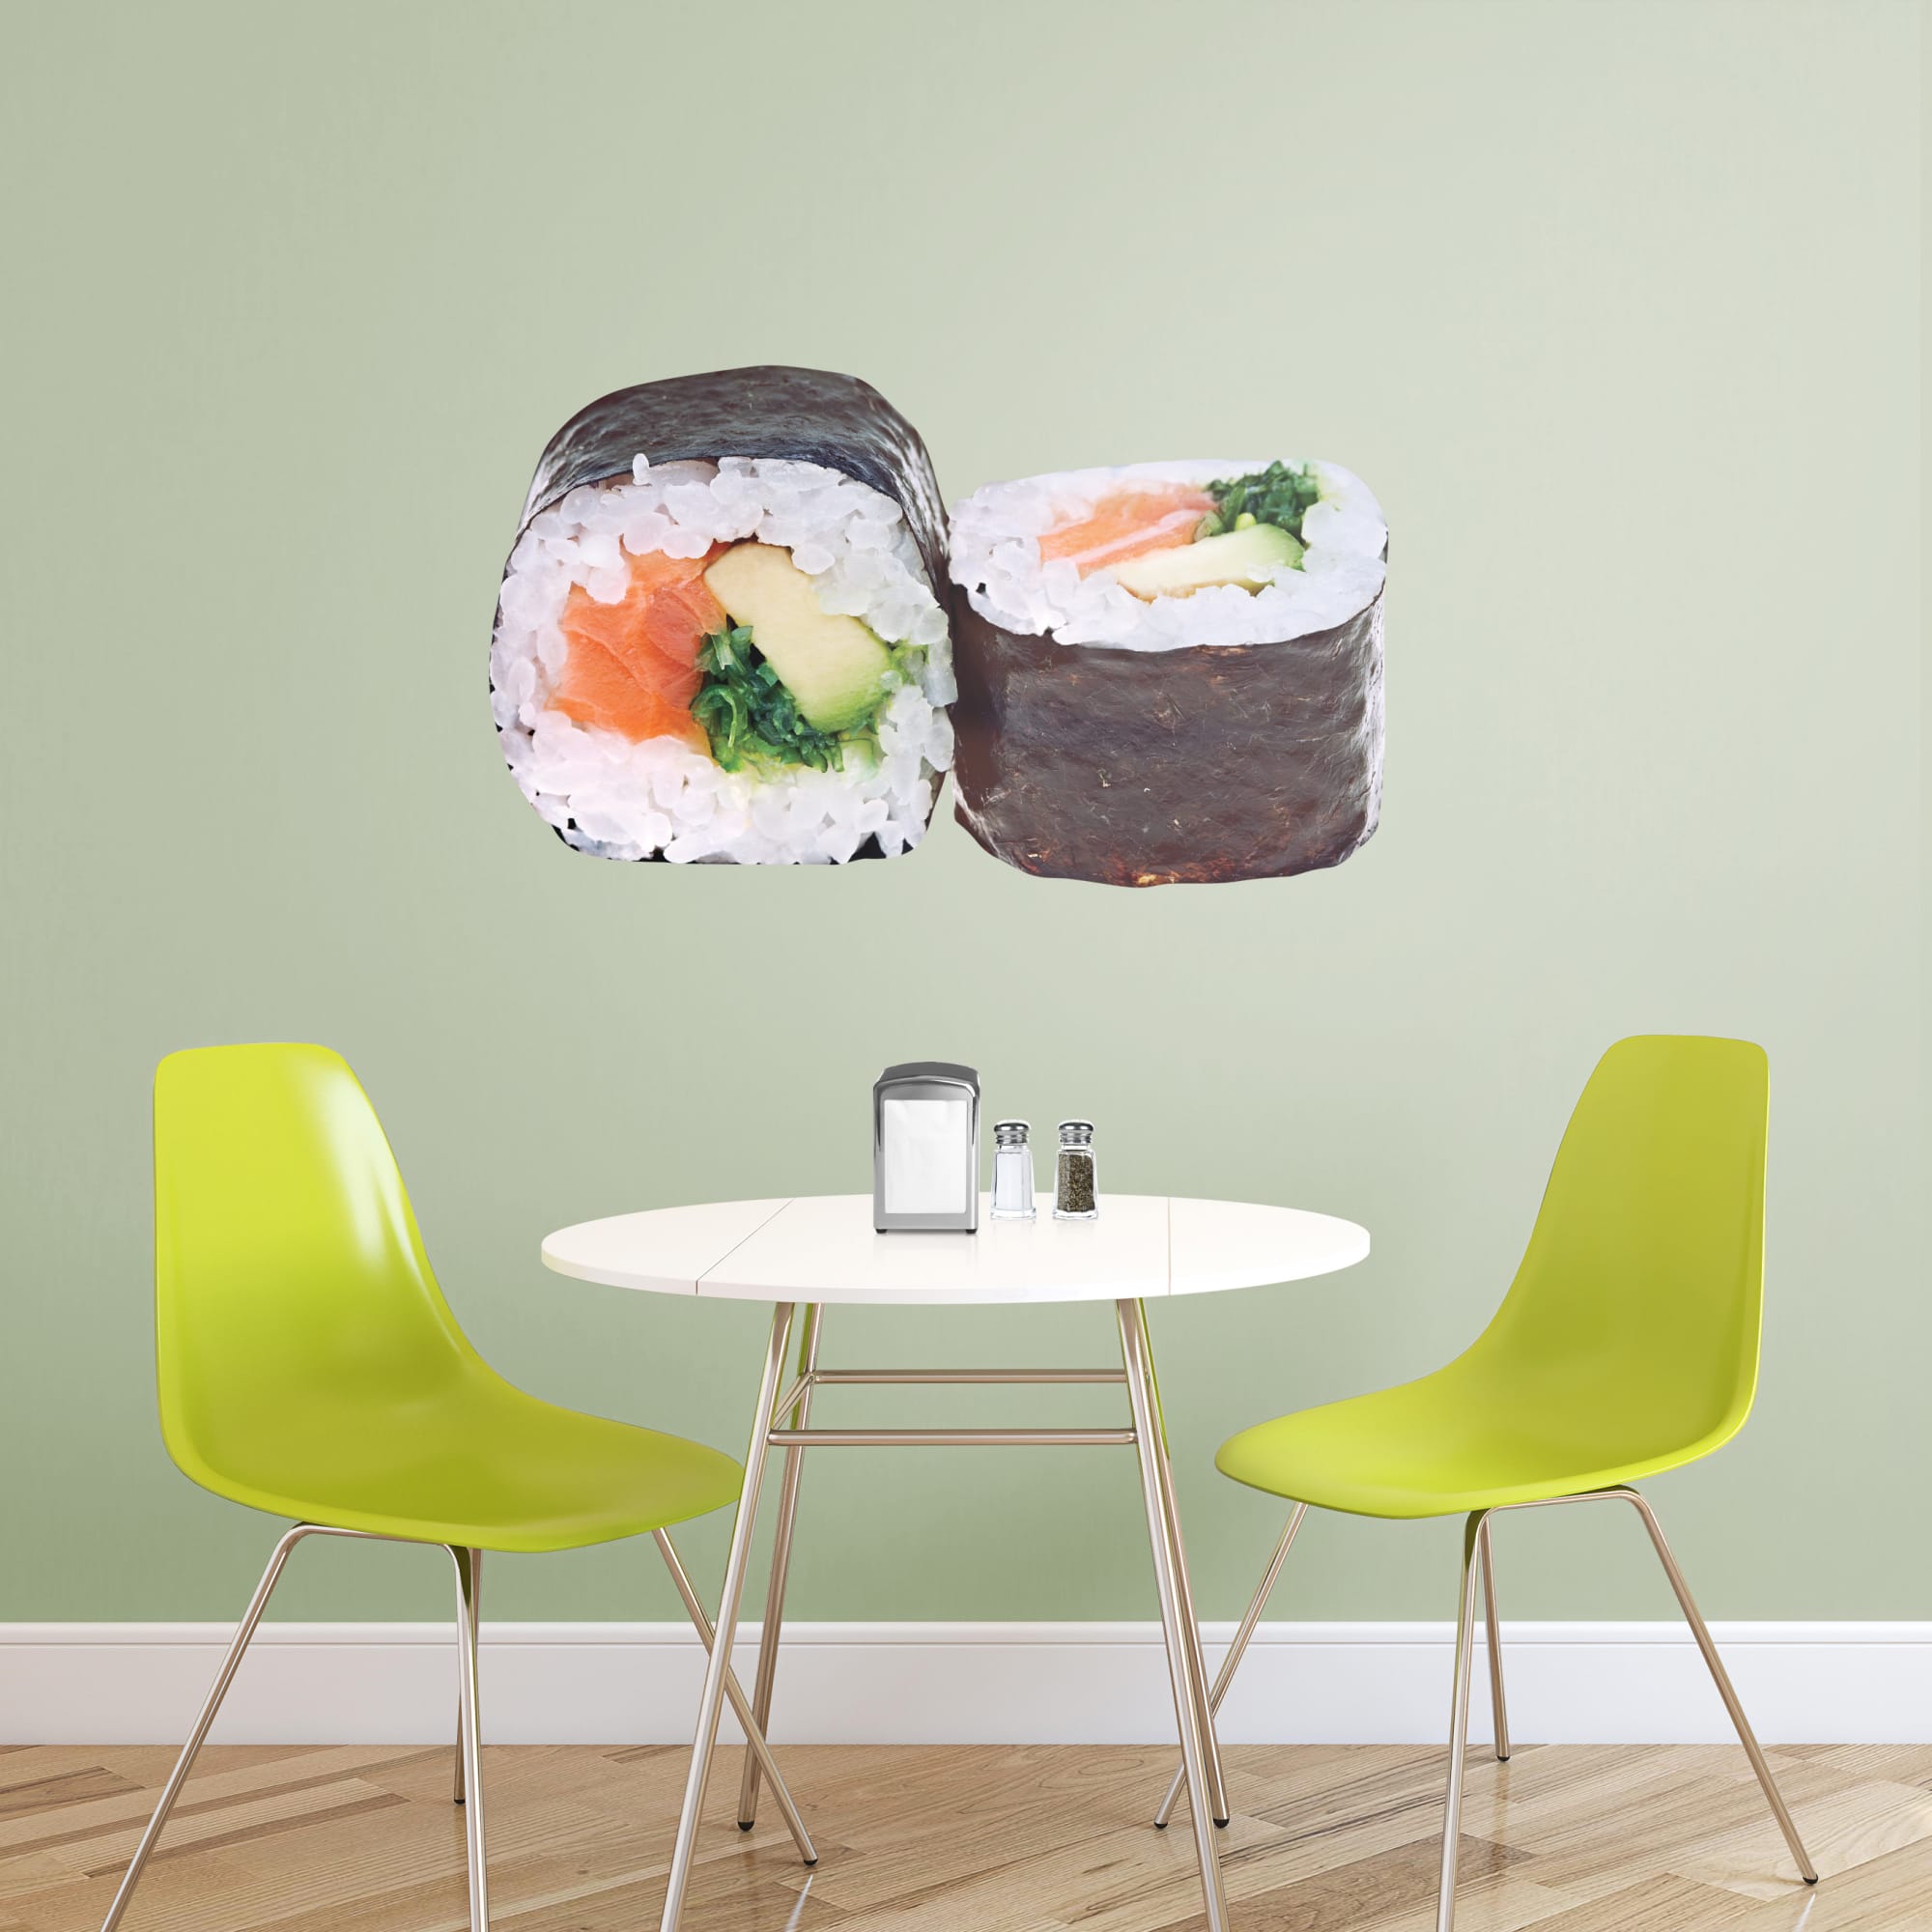 Sushi Roll - Removable Vinyl Decal Giant Sushi Roll + 2 Decals (50"W x 27"H) by Fathead